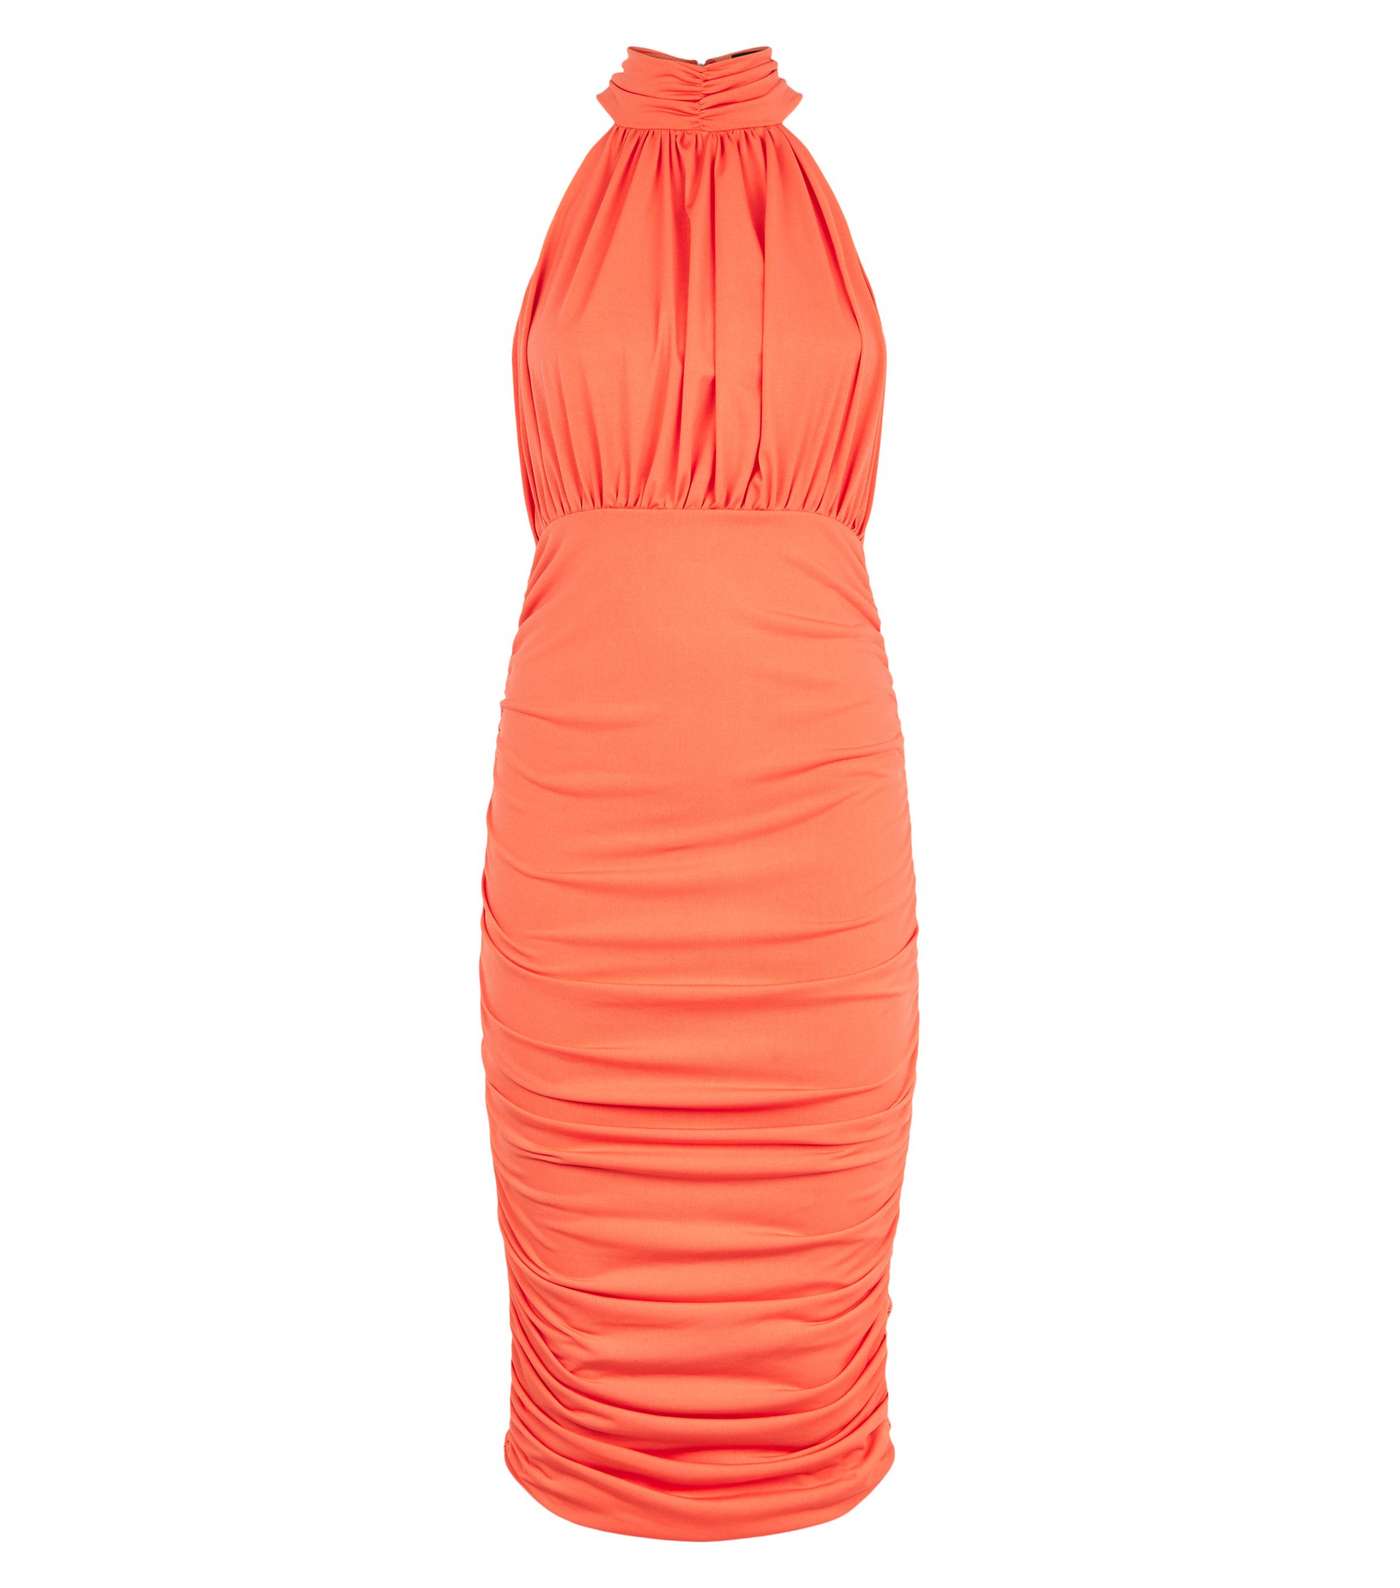 AX Paris Coral High Neck Ruched Bodycon Dress Image 3